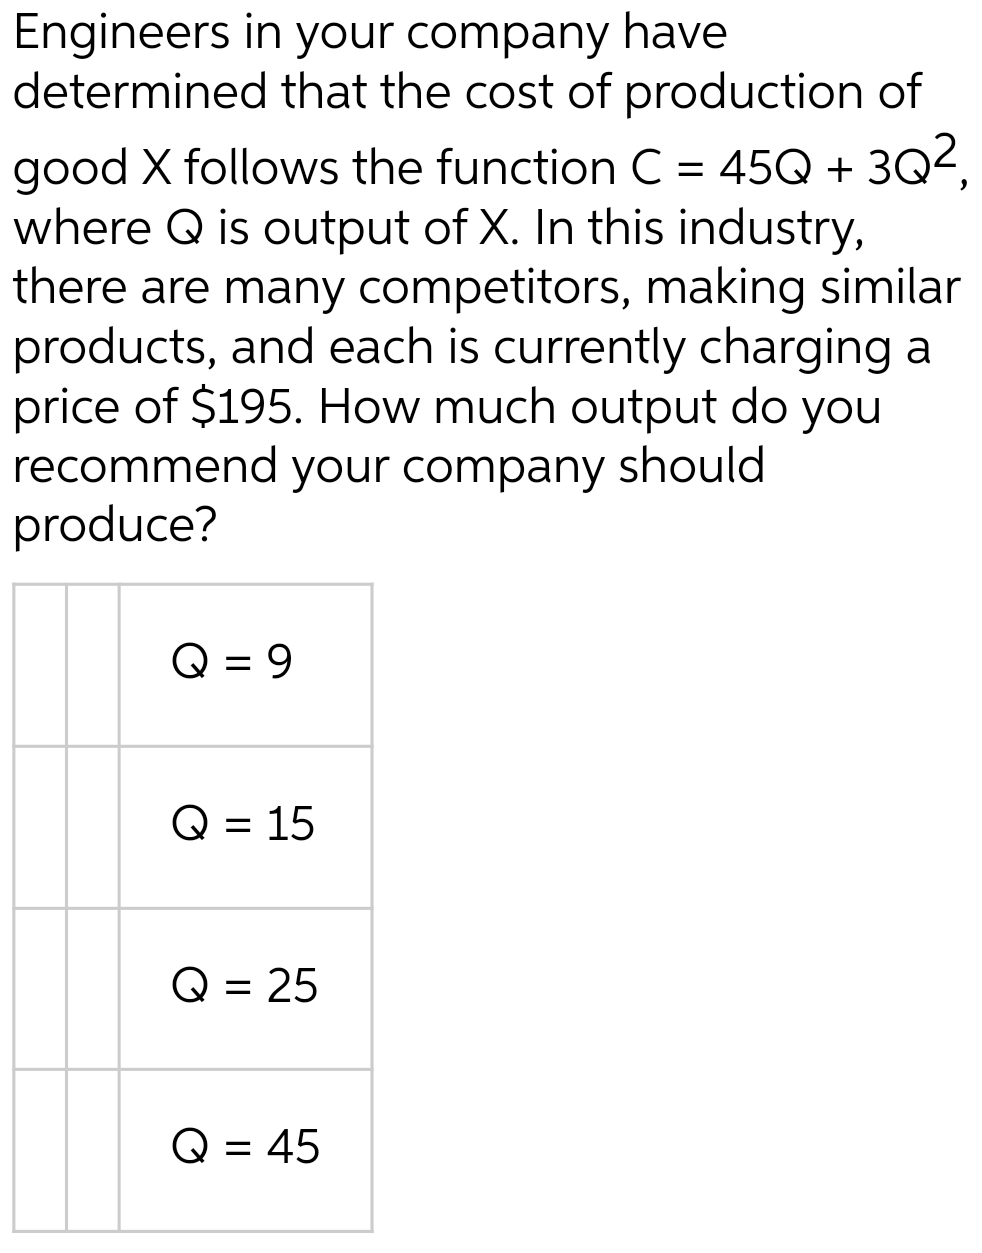 Engineers in your company have
determined that the cost of production of
good X follows the function C = 45Q + 3Q²,
where Q is output of X. In this industry,
there are many competitors, making similar
products, and each is currently charging a
price of $195. How much output do you
recommend your company should
produce?
Q = 9
Q = 15
Q
= 25
Q = 45
